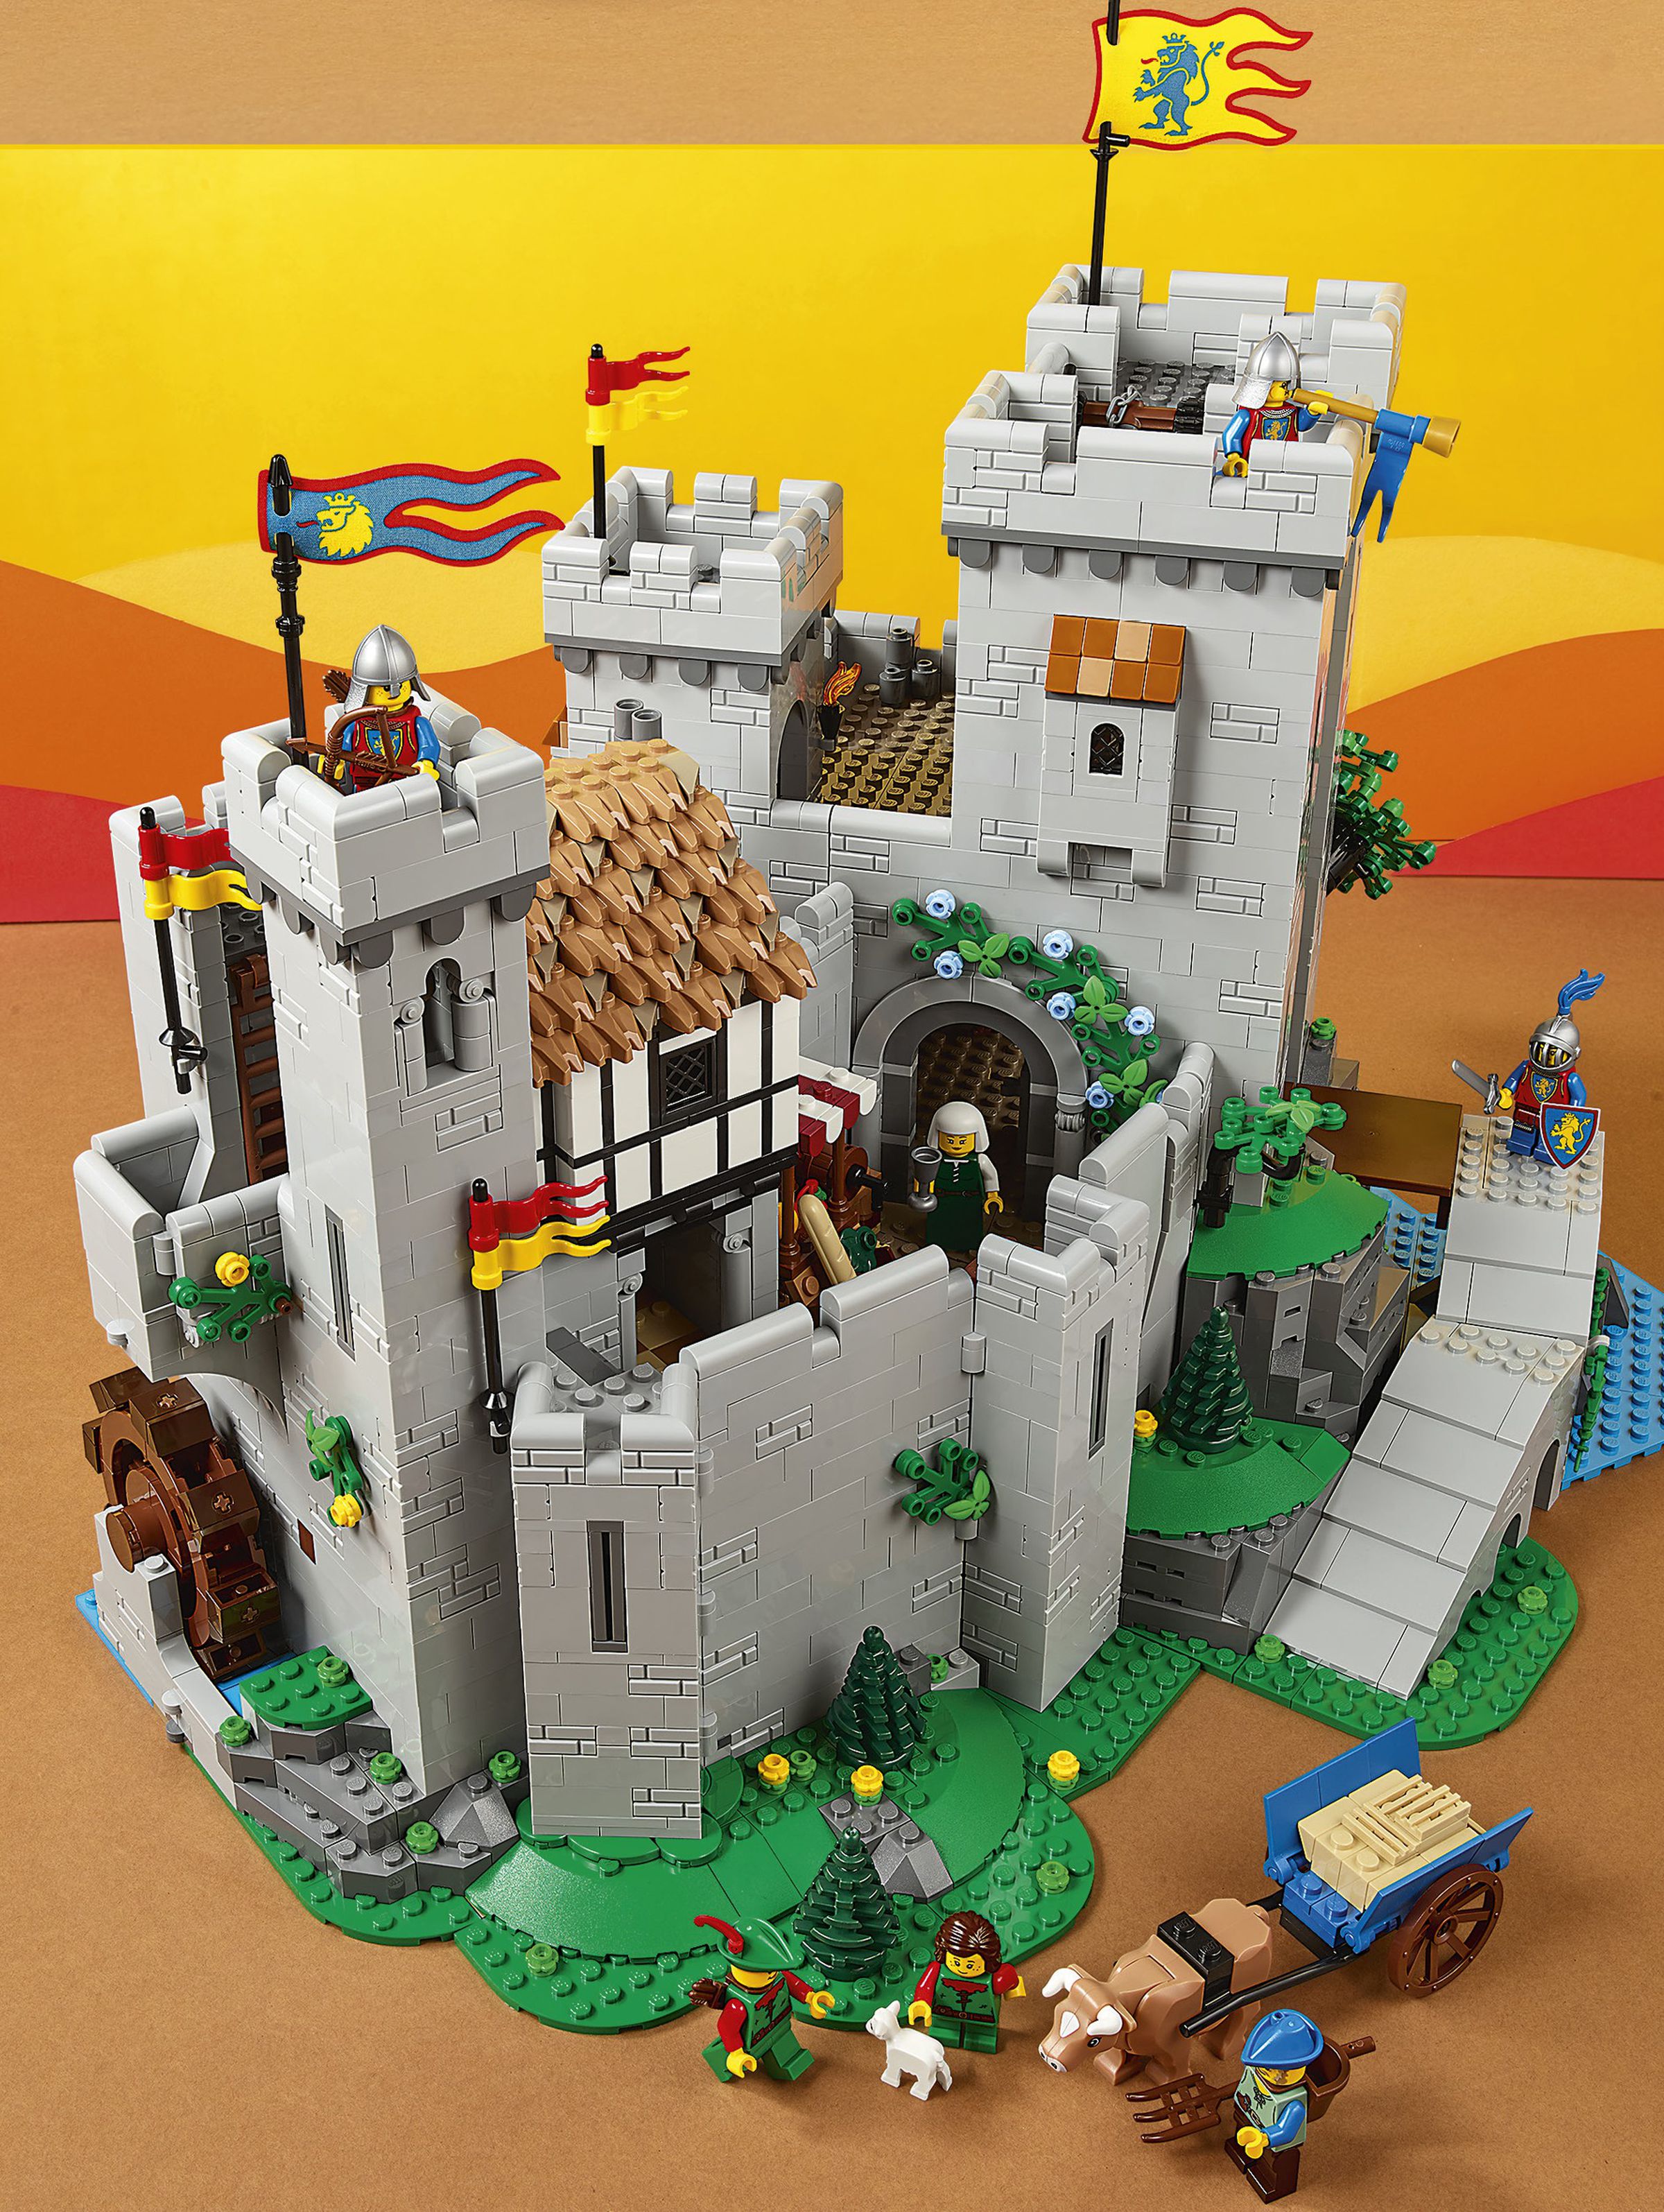 Closed, the castle is 17.5 inches / 44.5cm wide.